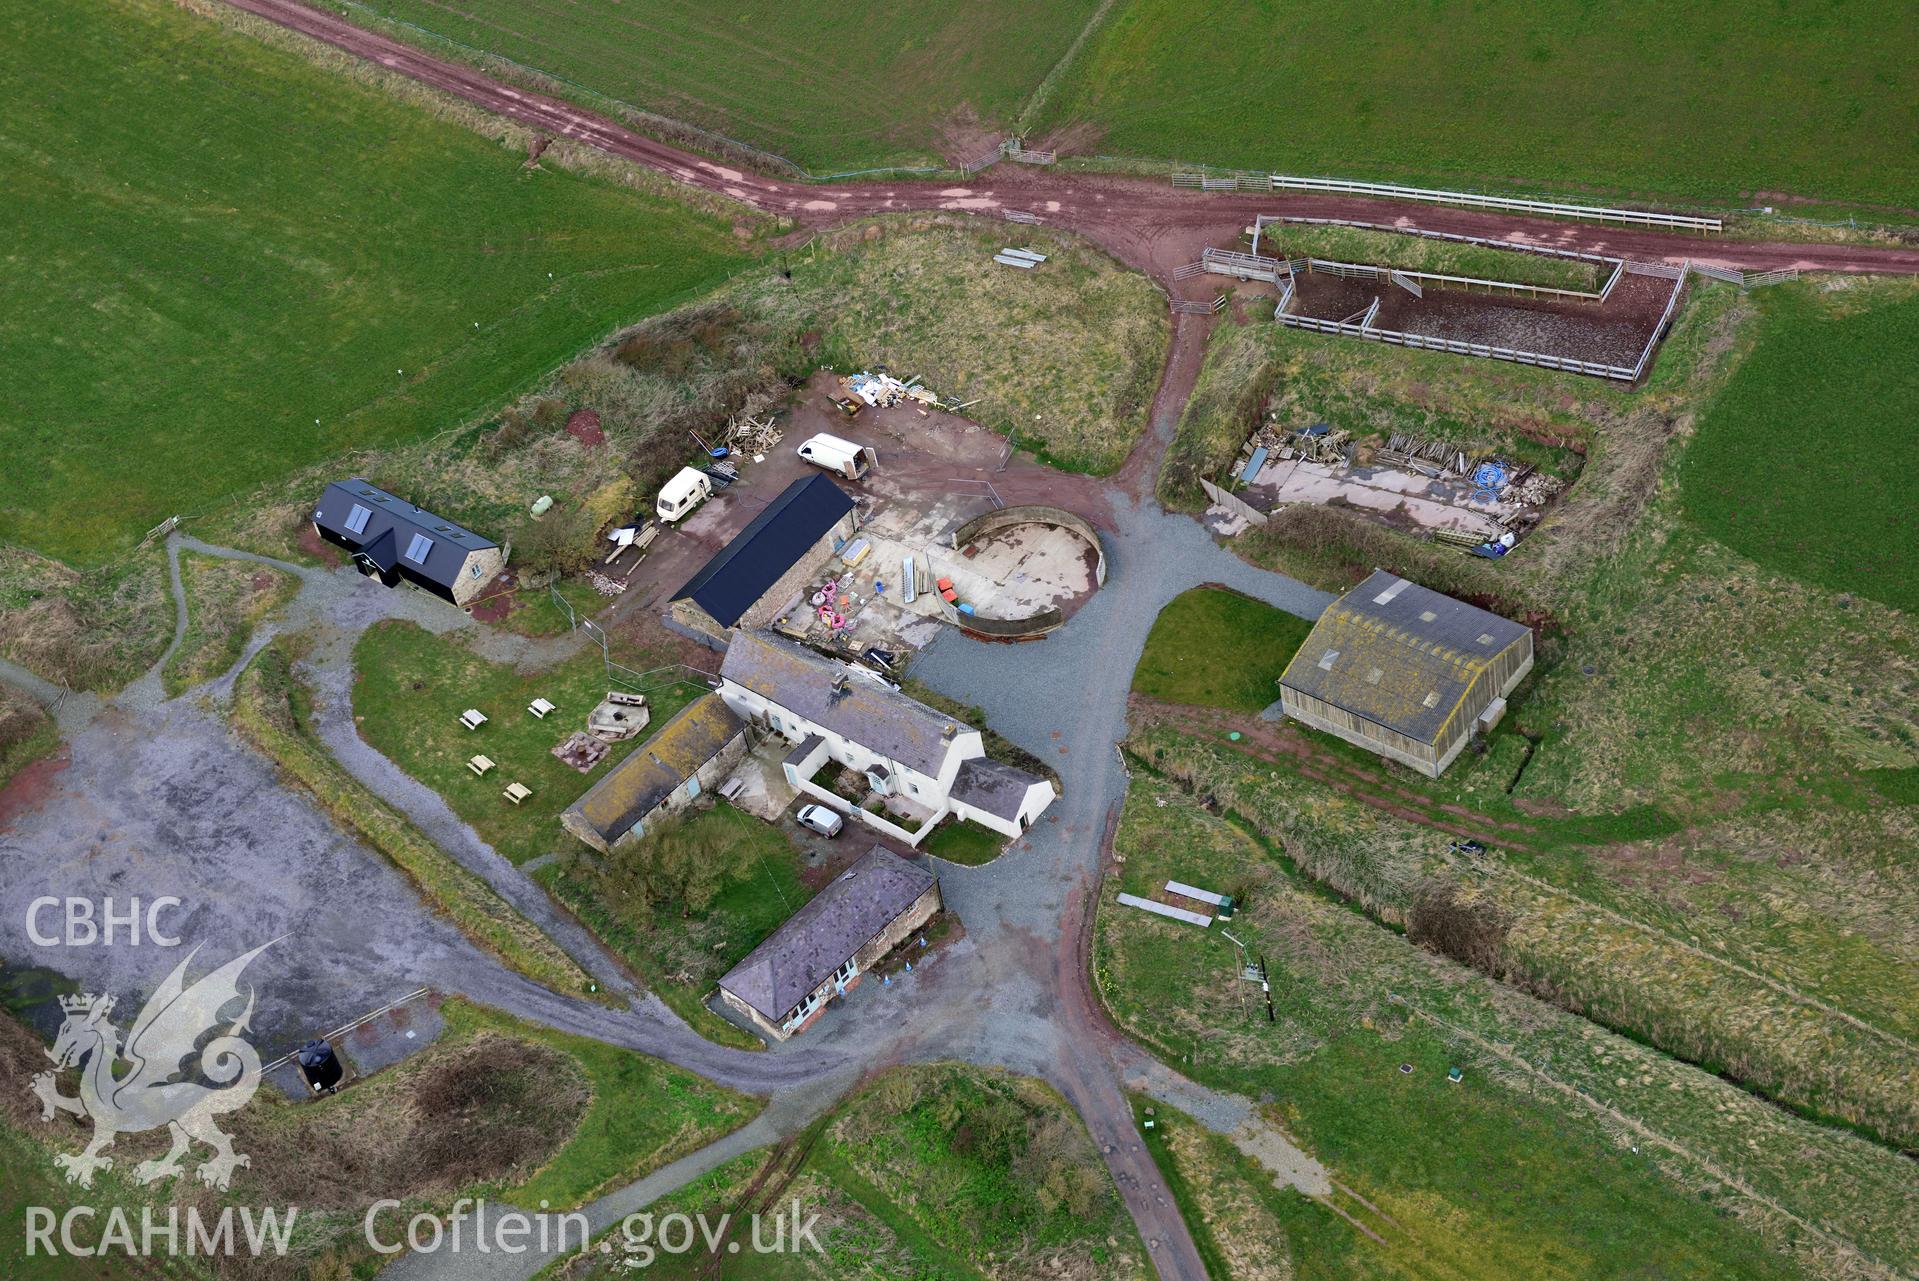 National Trust Gupton Farm. Baseline aerial reconnaissance survey for the CHERISH Project. ? Crown: CHERISH PROJECT 2018. Produced with EU funds through the Ireland Wales Co-operation Programme 2014-2020. All material made freely available through the Open Government Licence.